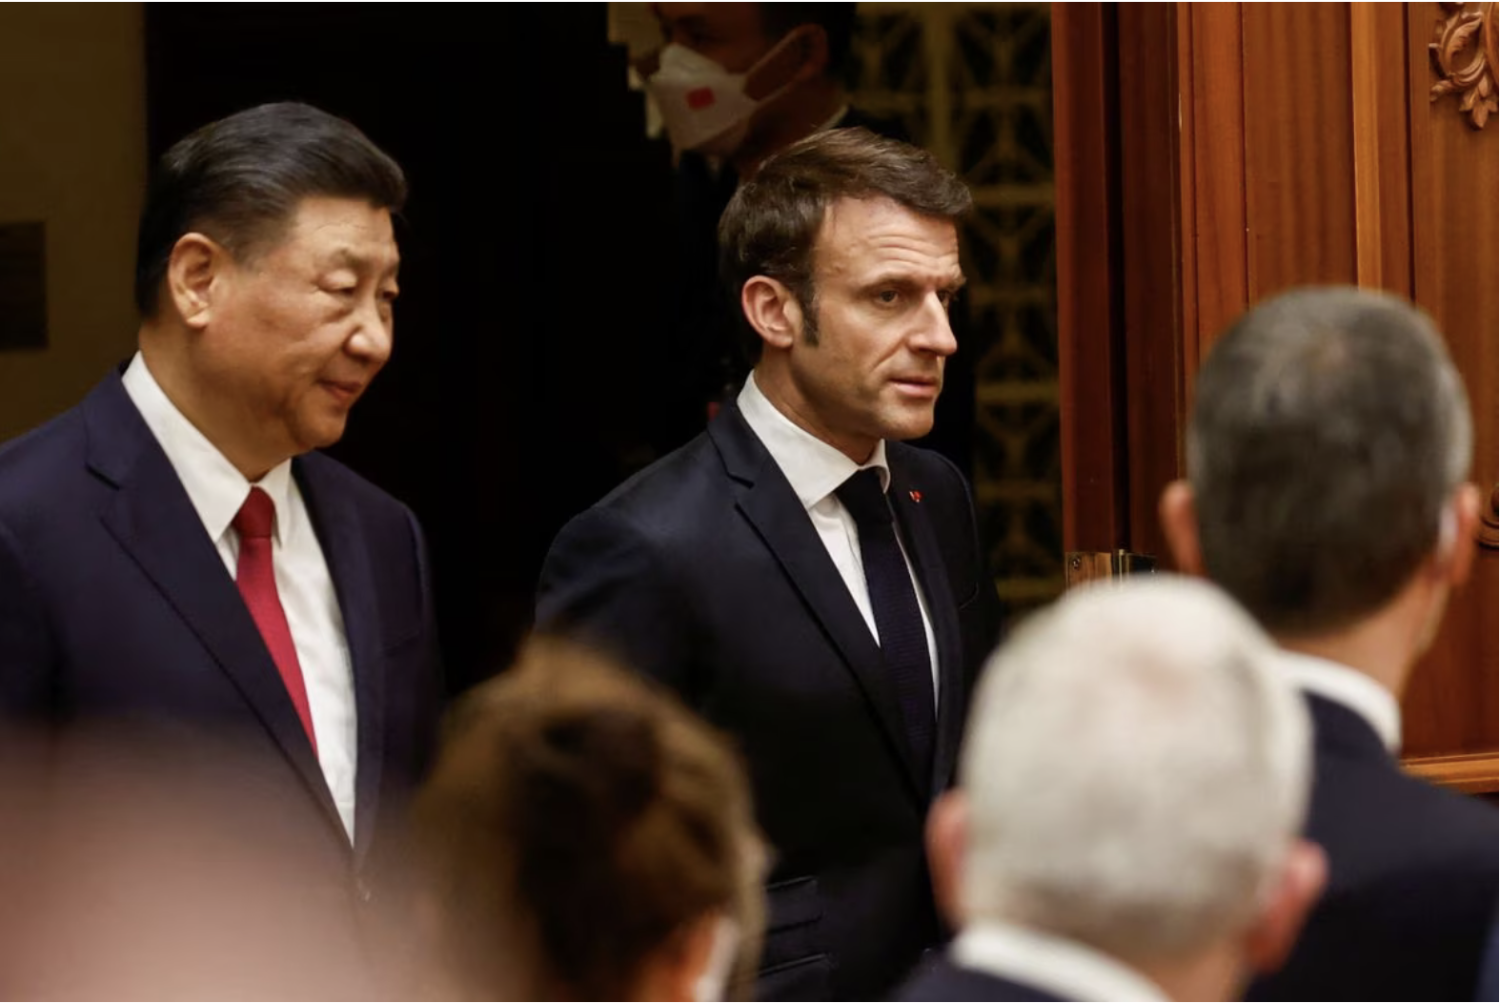 Chinese President Xi Jinping and French President Emmanuel Macron attend a signing ceremony at the Great Hall of the People, in Beijing, China, April 6, 2023. REUTERS/Gonzalo Fuentes